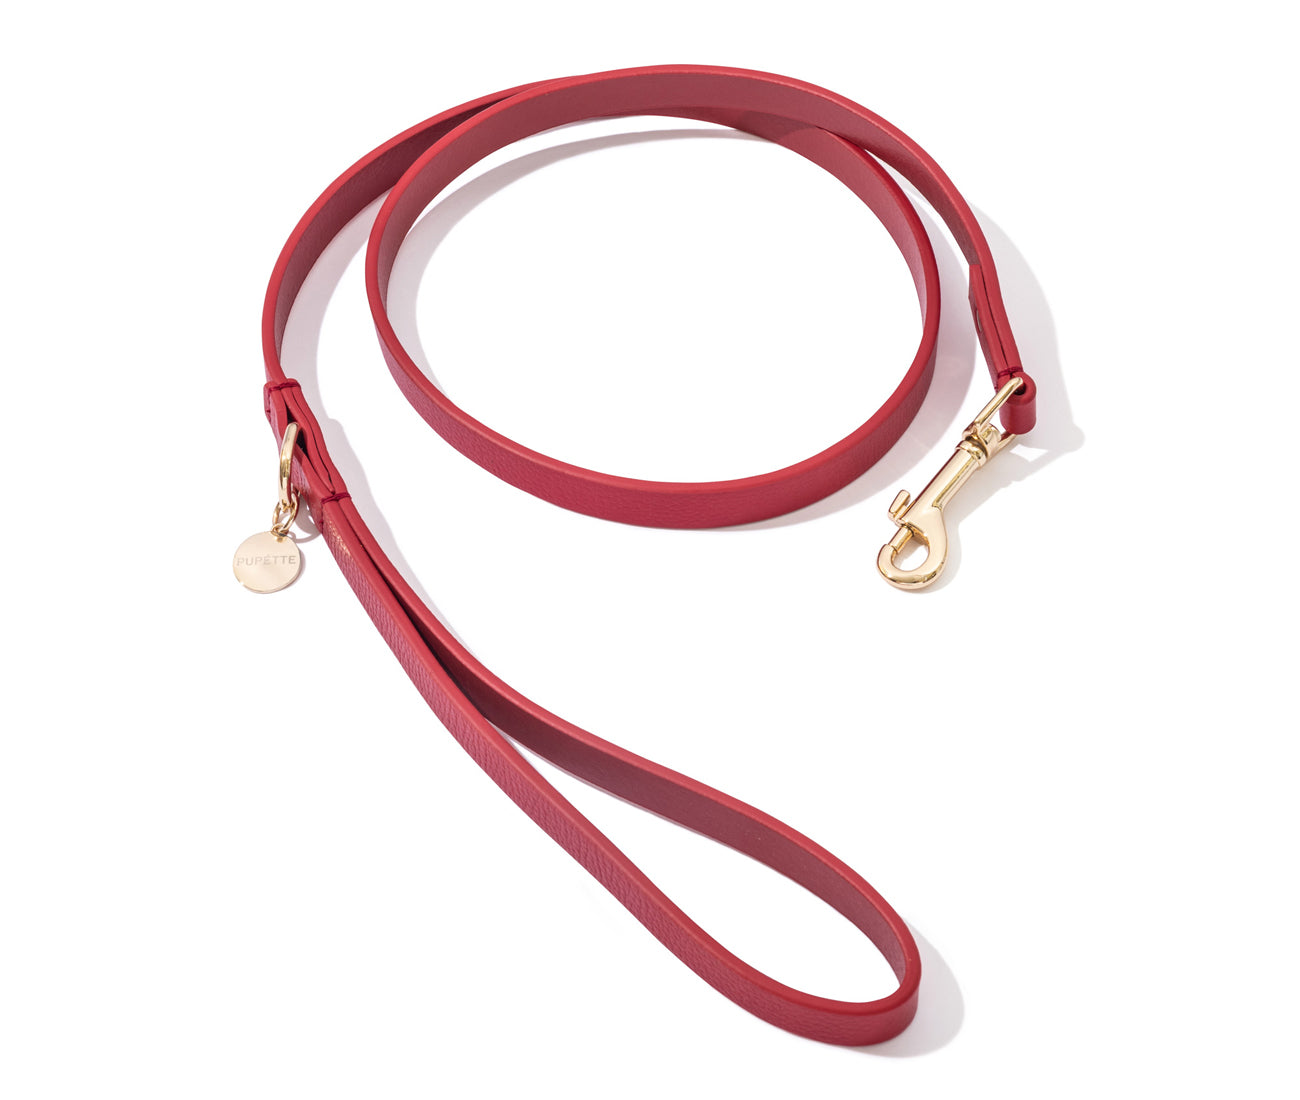 Luxe Leather Dog Lead - Red